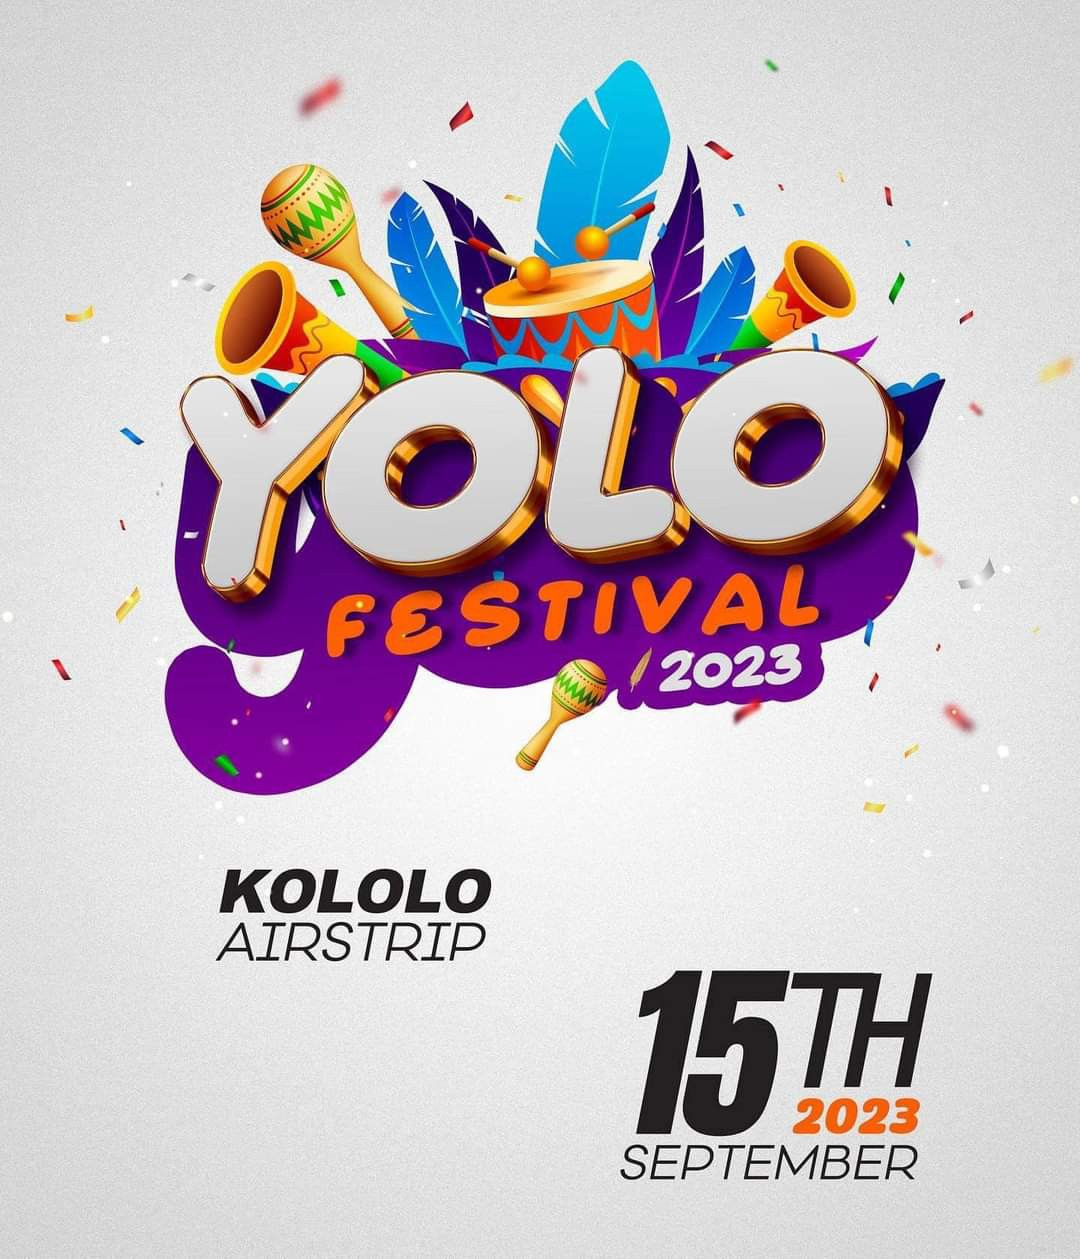 Yolo Festival - Kololo Independence Grounds Event